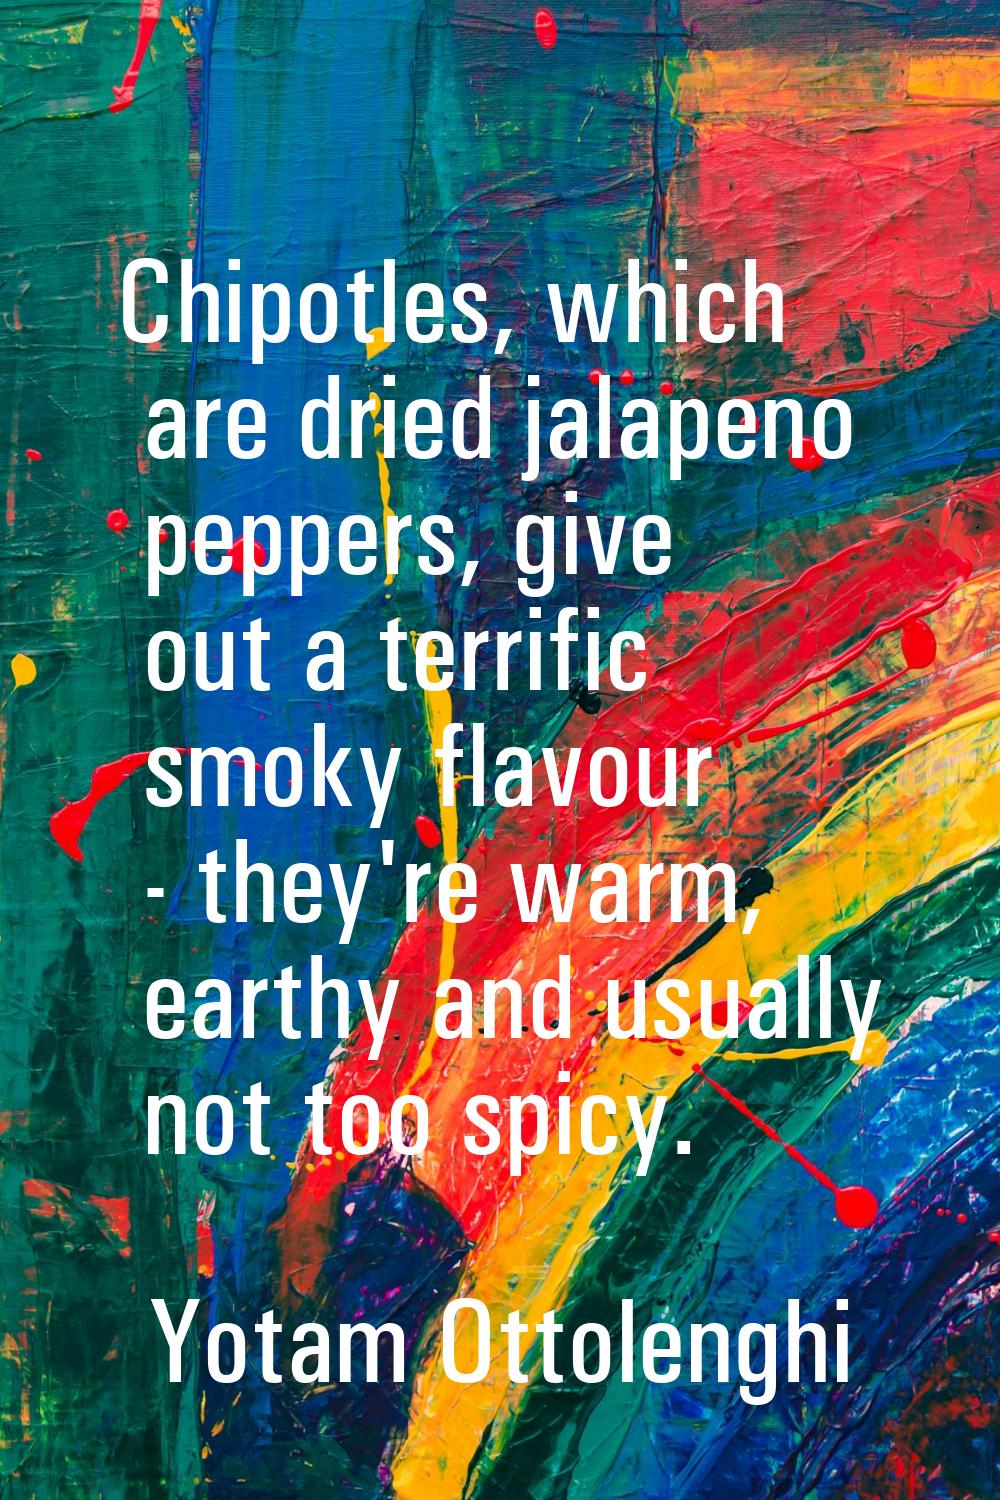 Chipotles, which are dried jalapeno peppers, give out a terrific smoky flavour - they're warm, eart